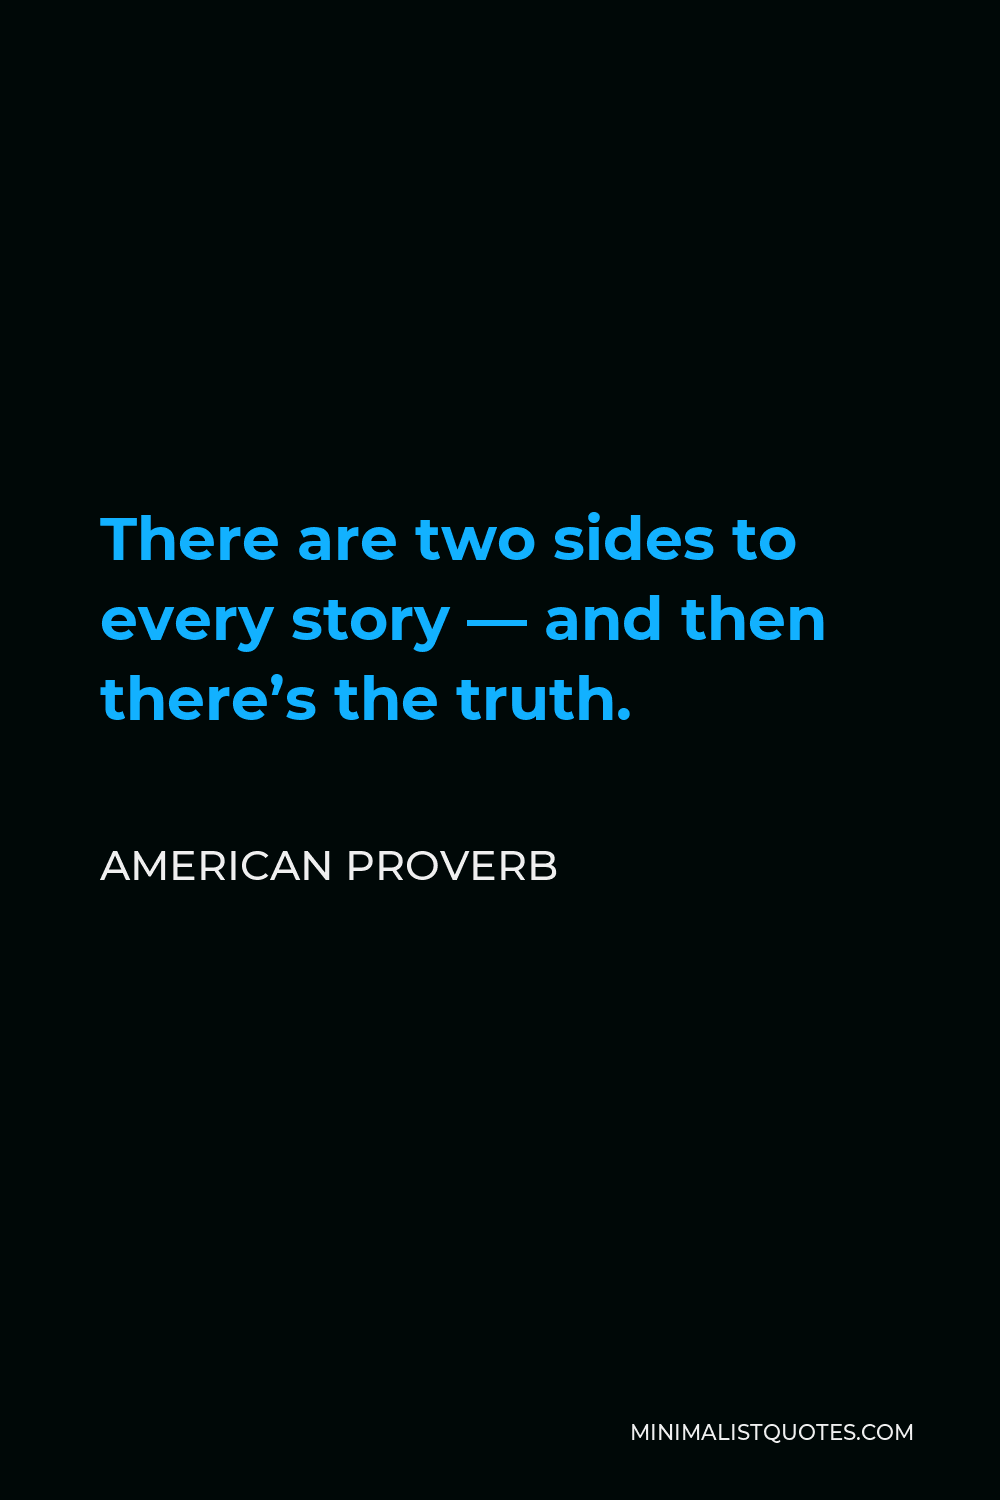 American Proverb Quote - There are two sides to every story — and then there’s the truth.